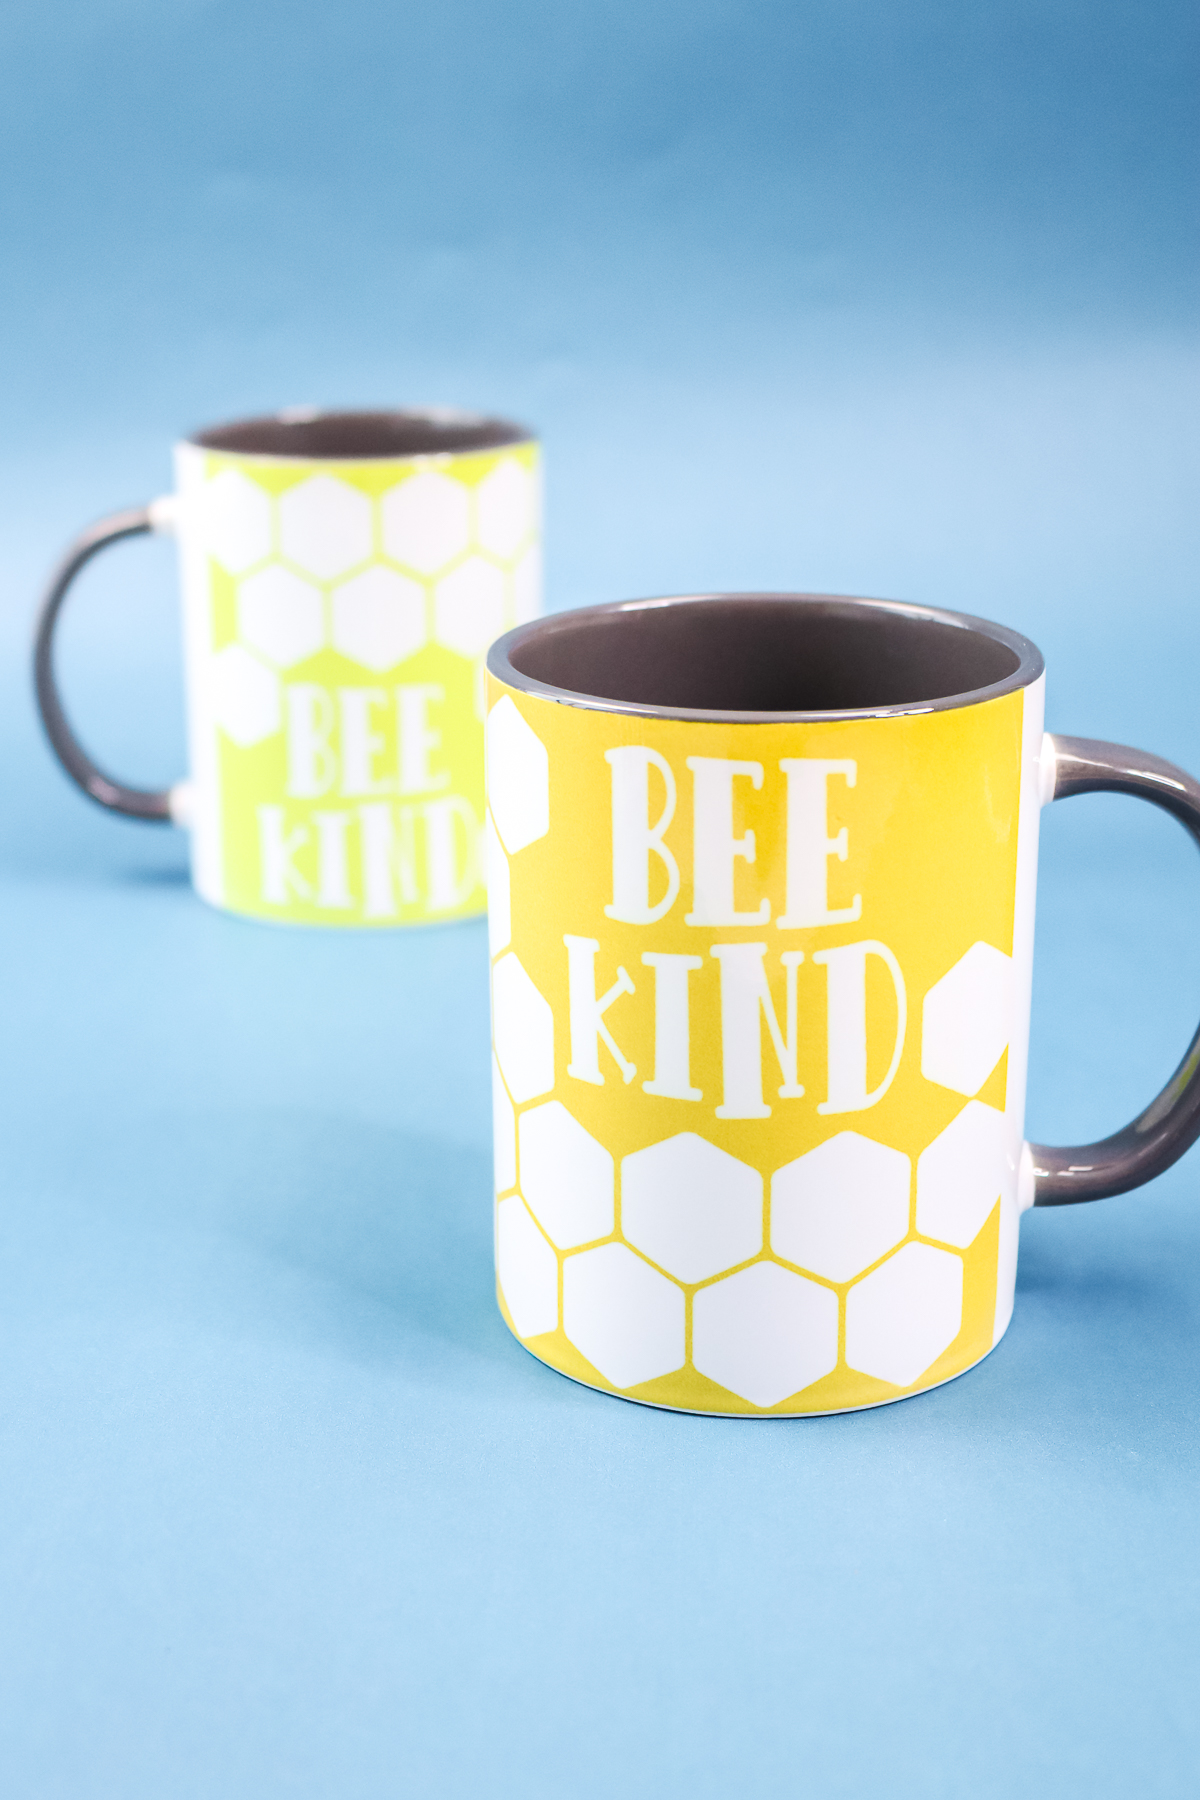 Sublimation Mug Designs: 13 Free Downloads - Angie Holden The